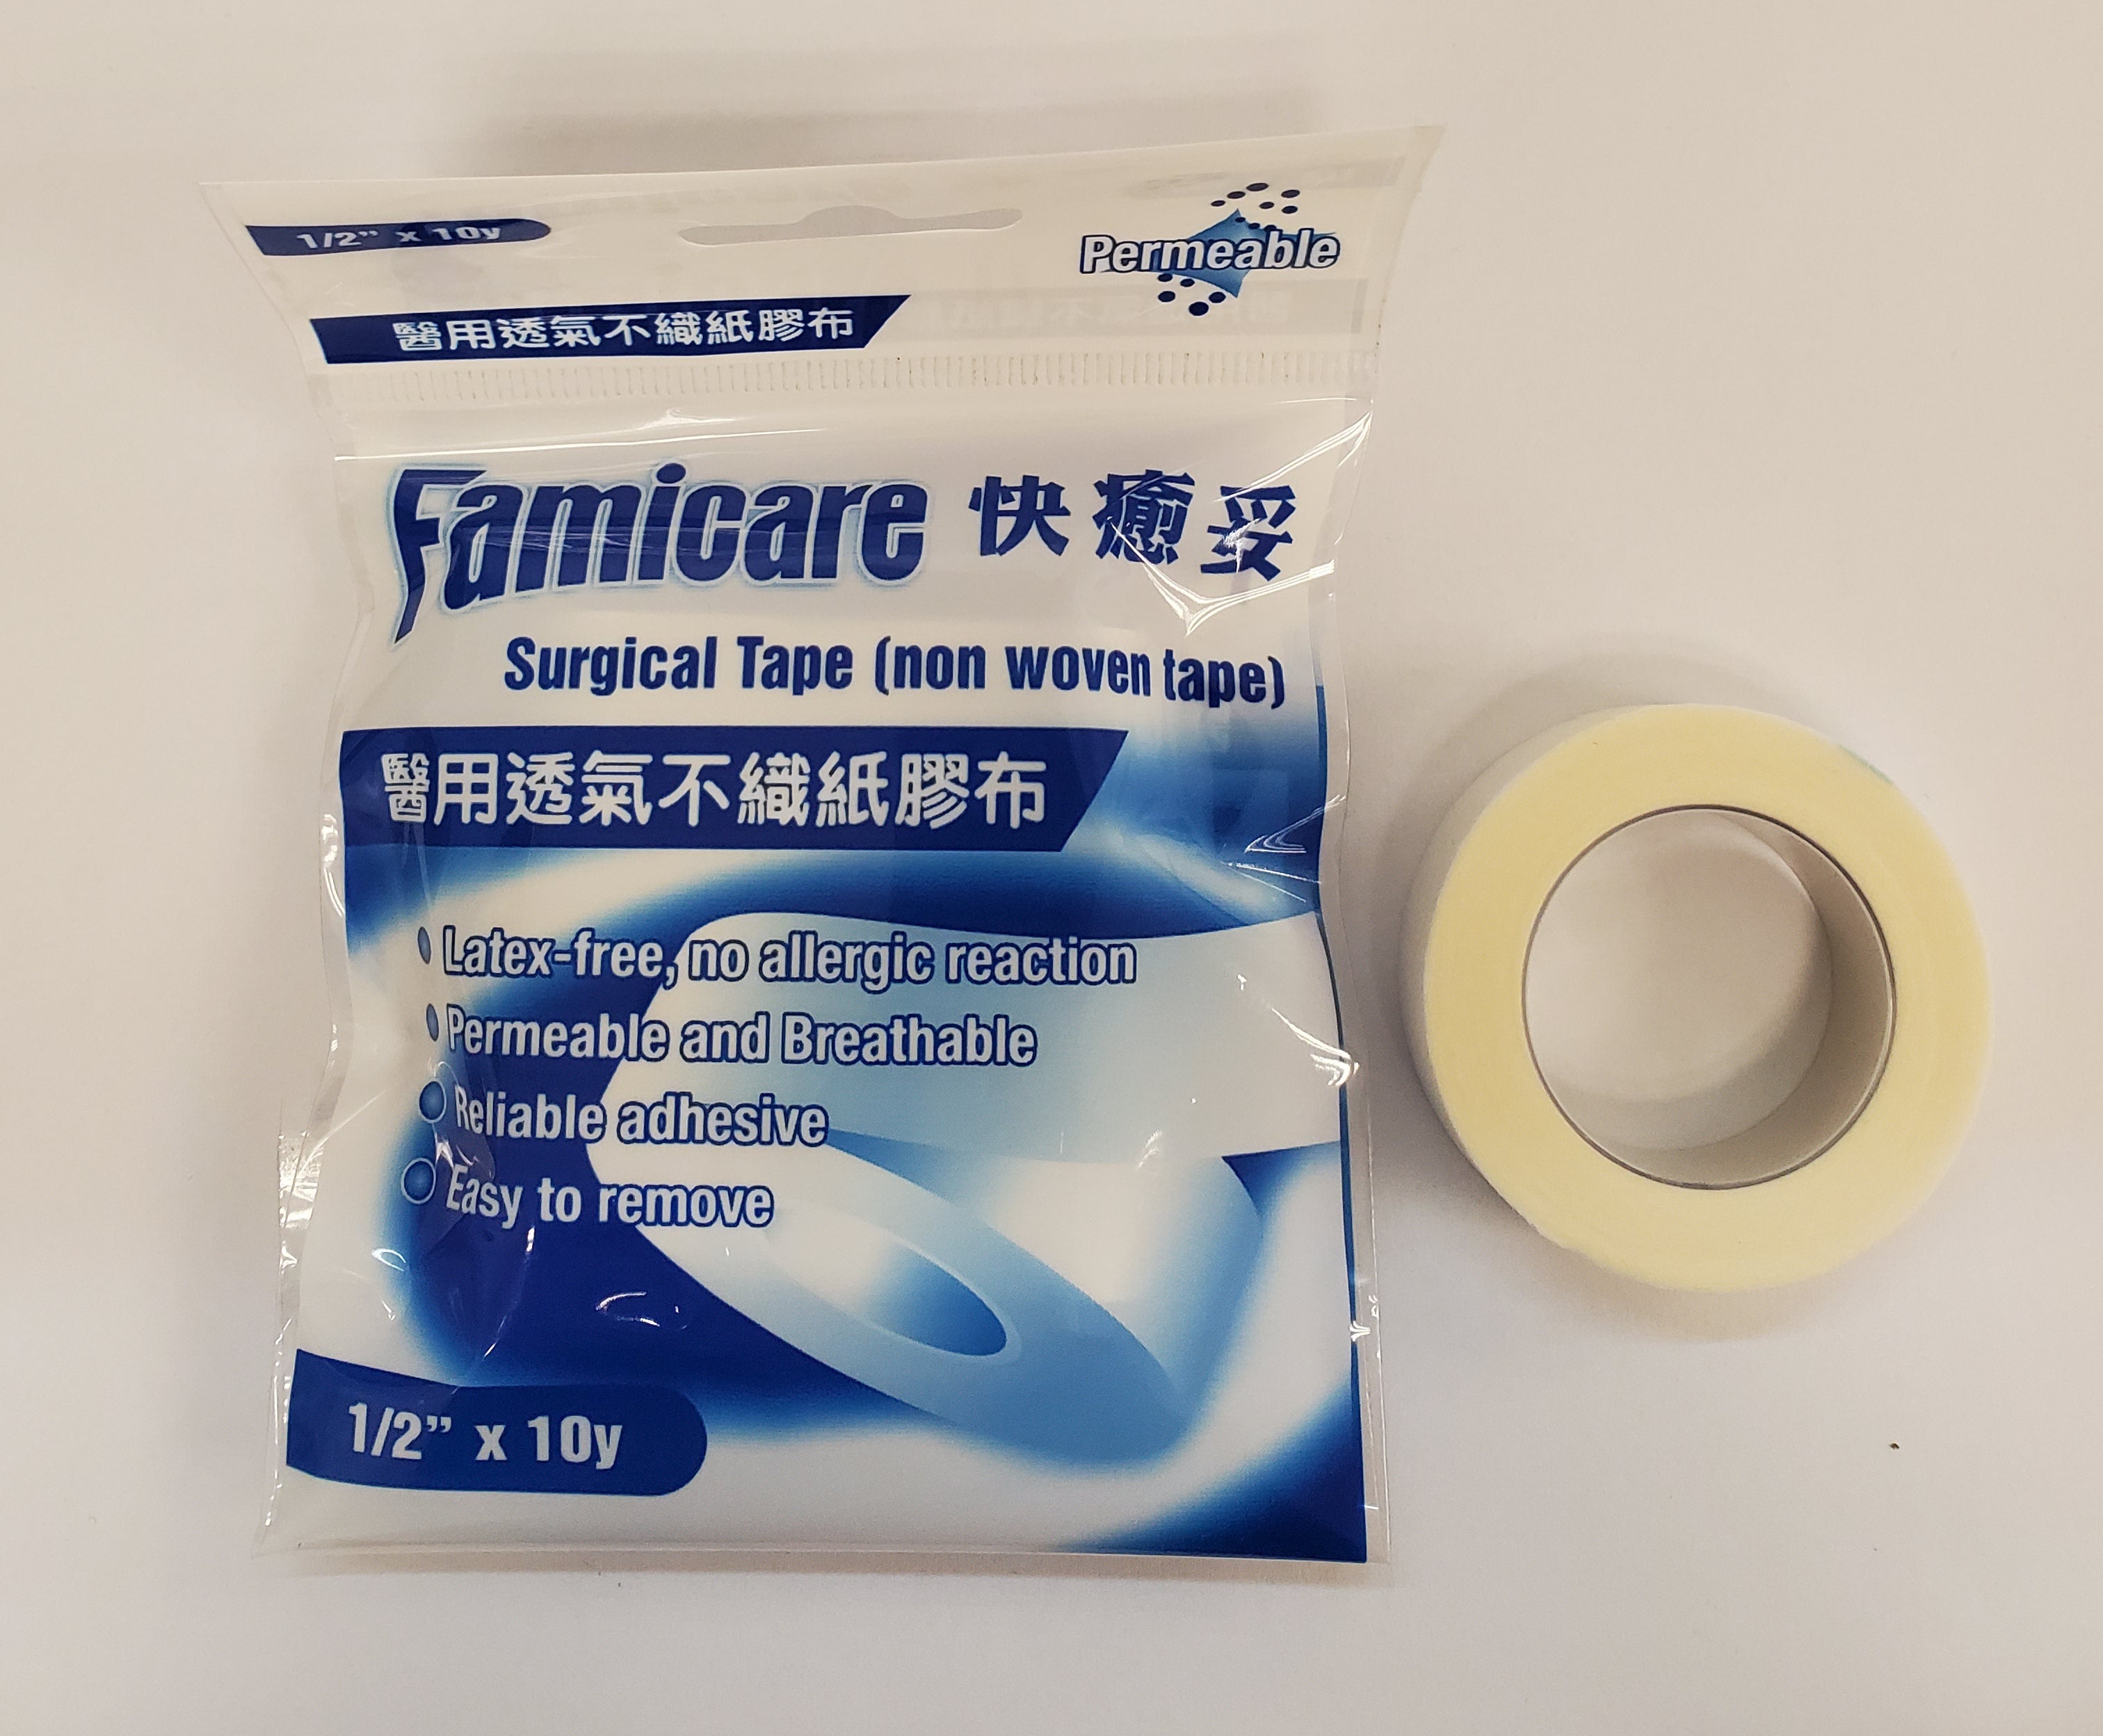 Famicare Surgical Tape (non woven tape) - 1.25cm X 10y